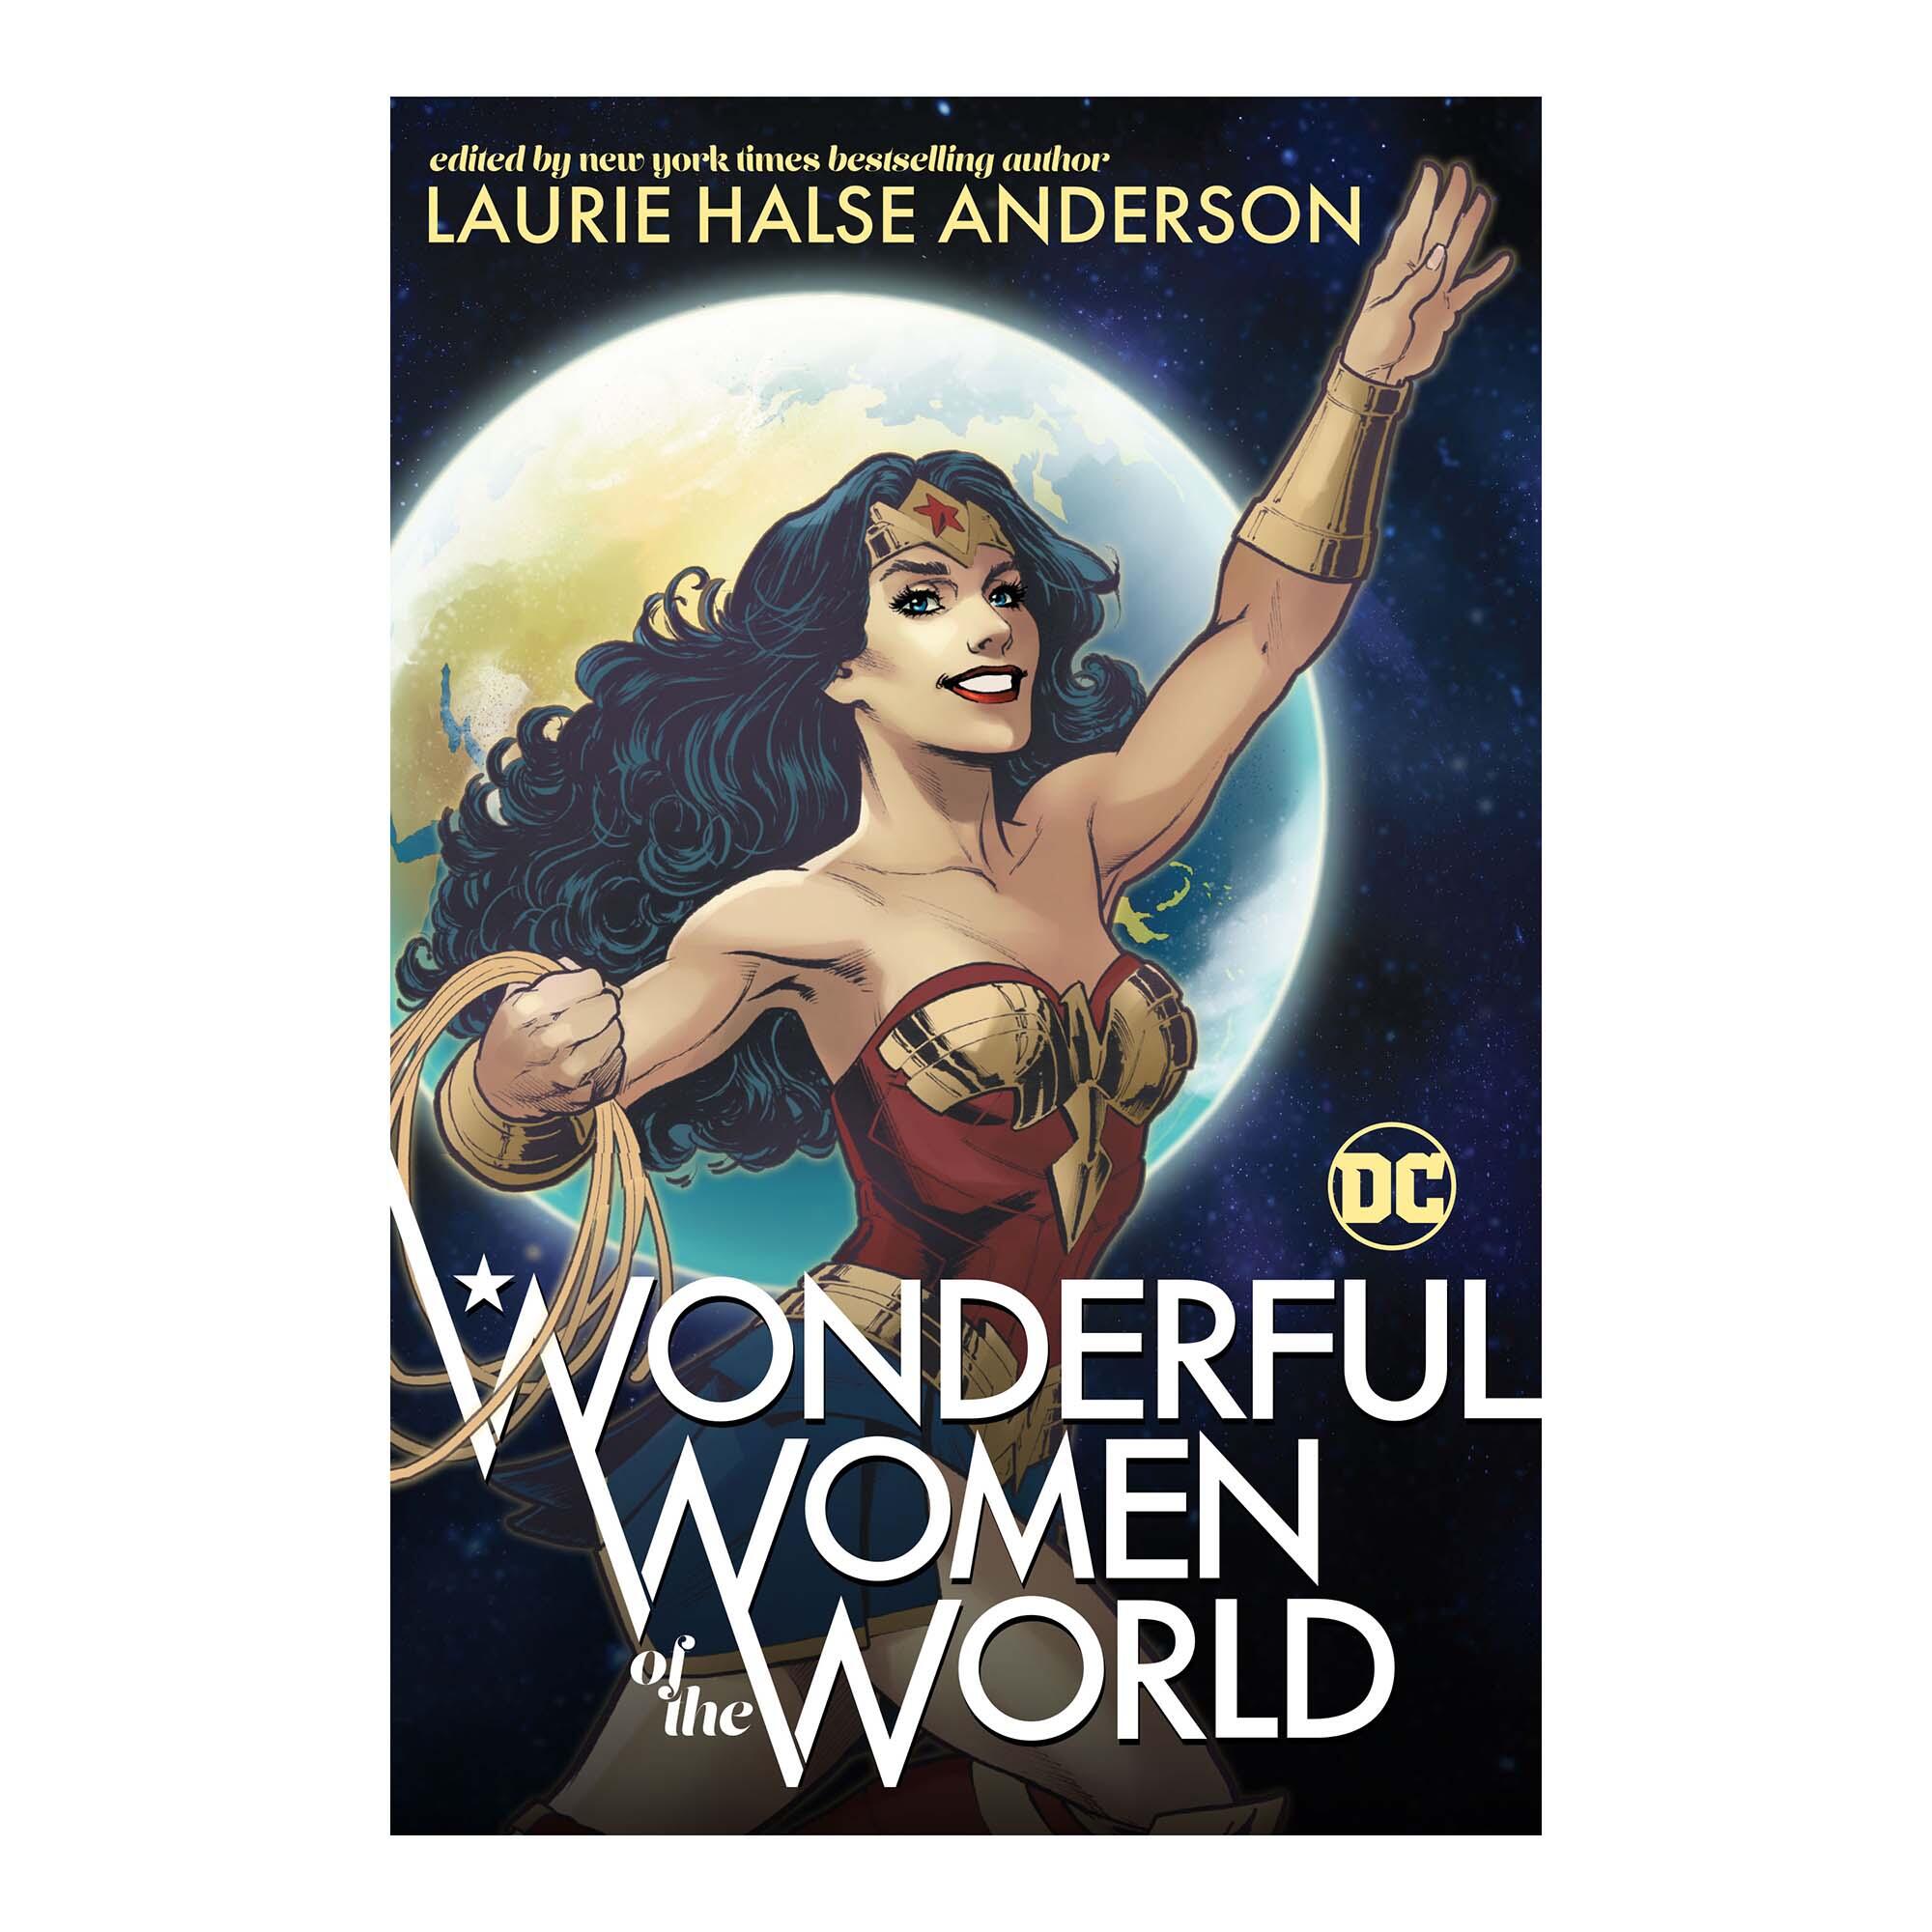 "Wonderful Women of the World" cover